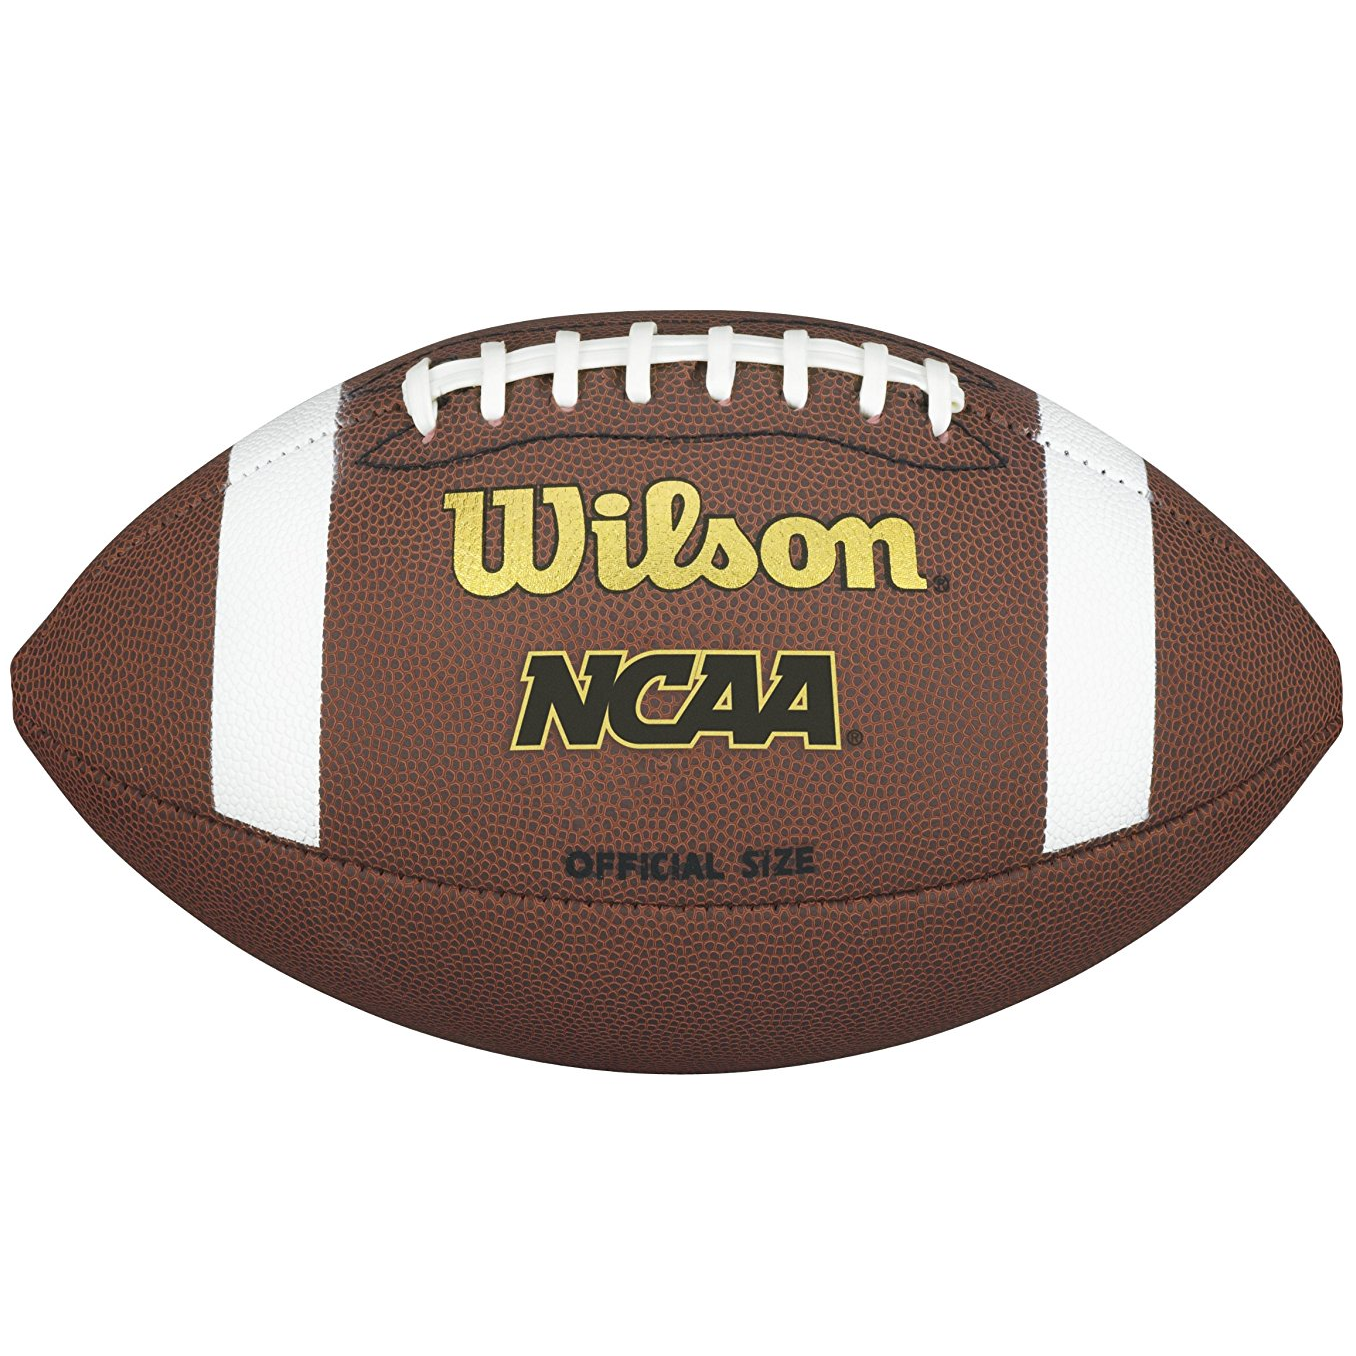 HURRY! Wilson NCAA Composite Football Only $8.99 on Amazon! (Official NCAA Size)